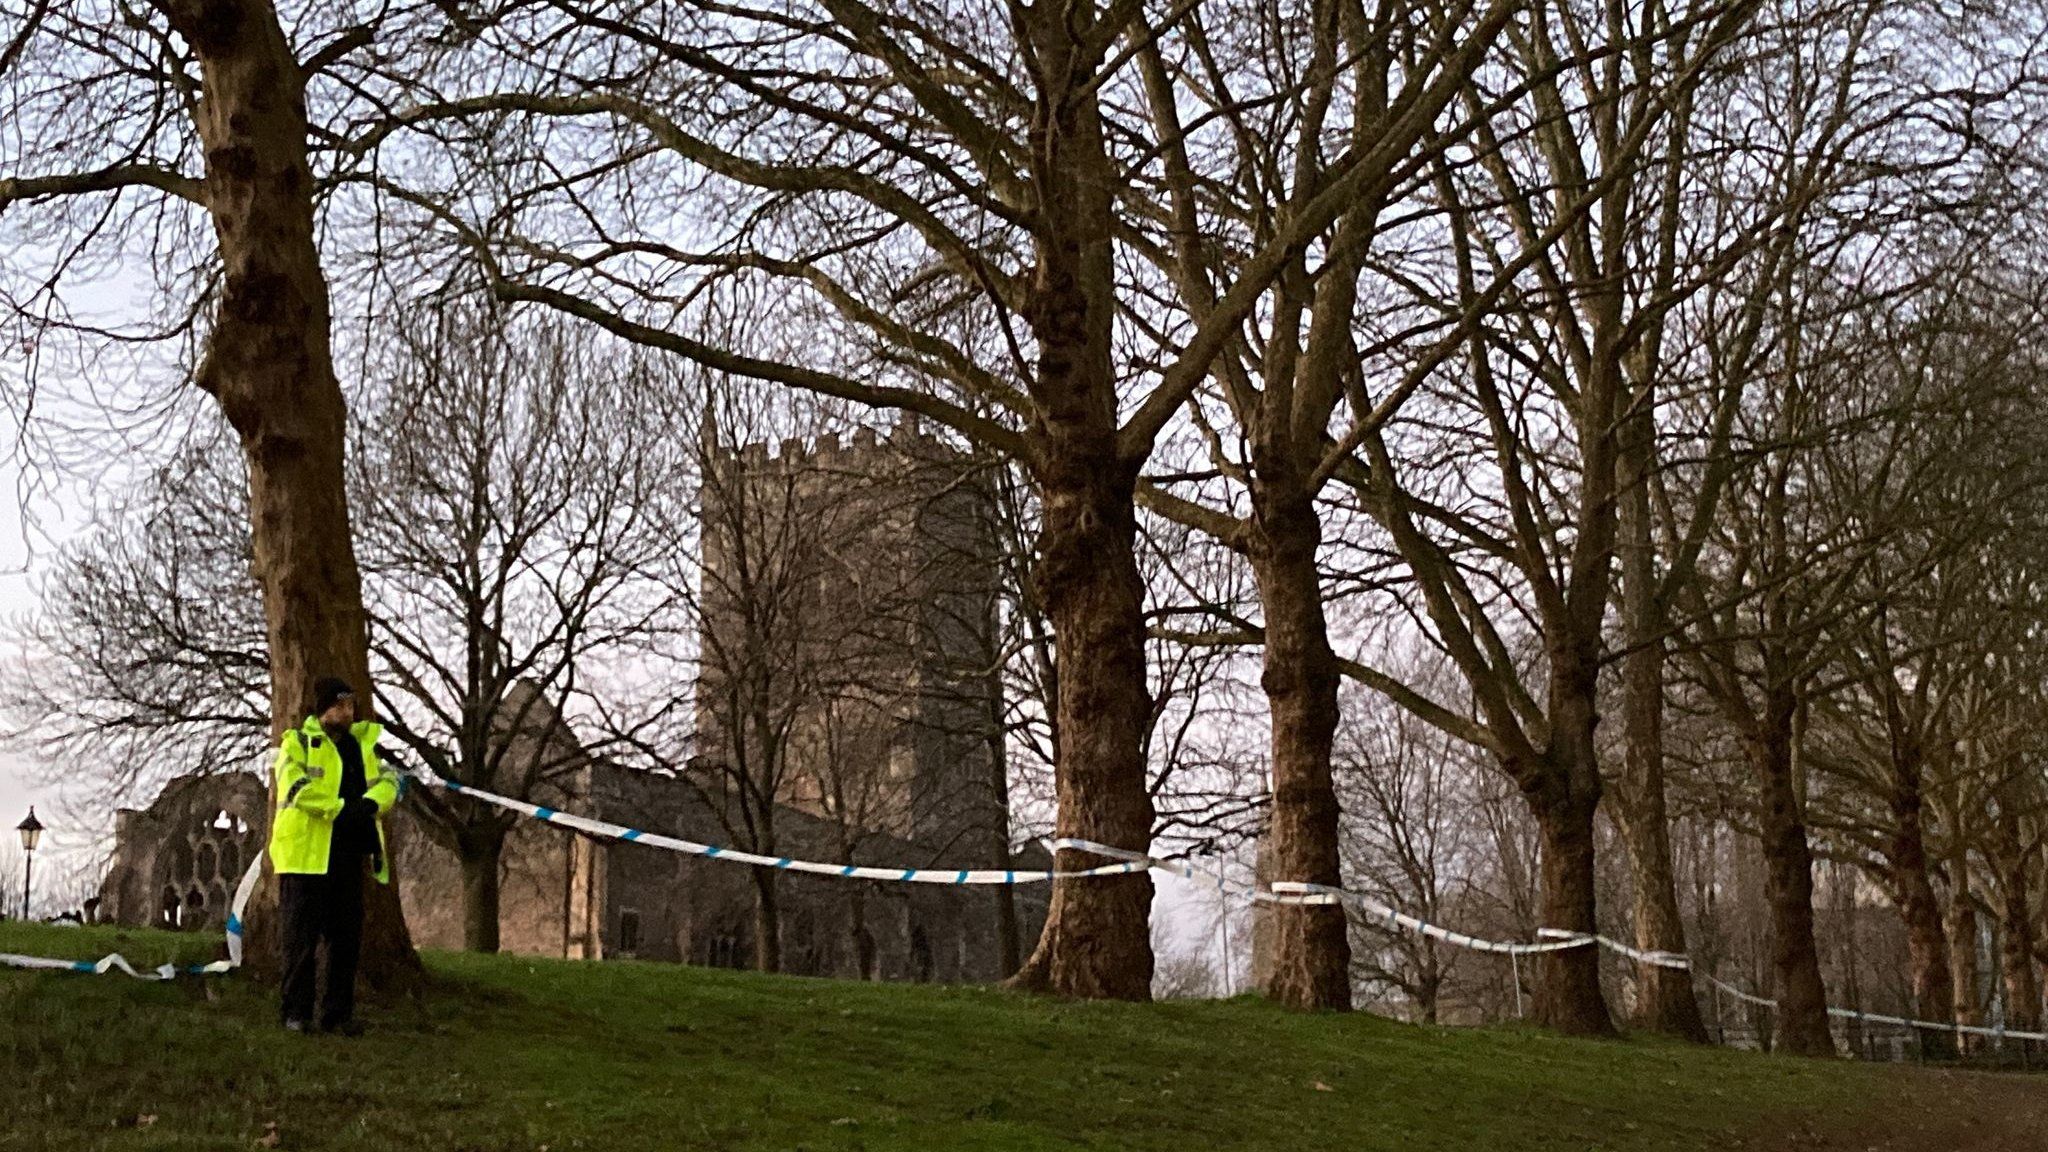 Cordon in place at Castle Park. Police officer and church in shot.